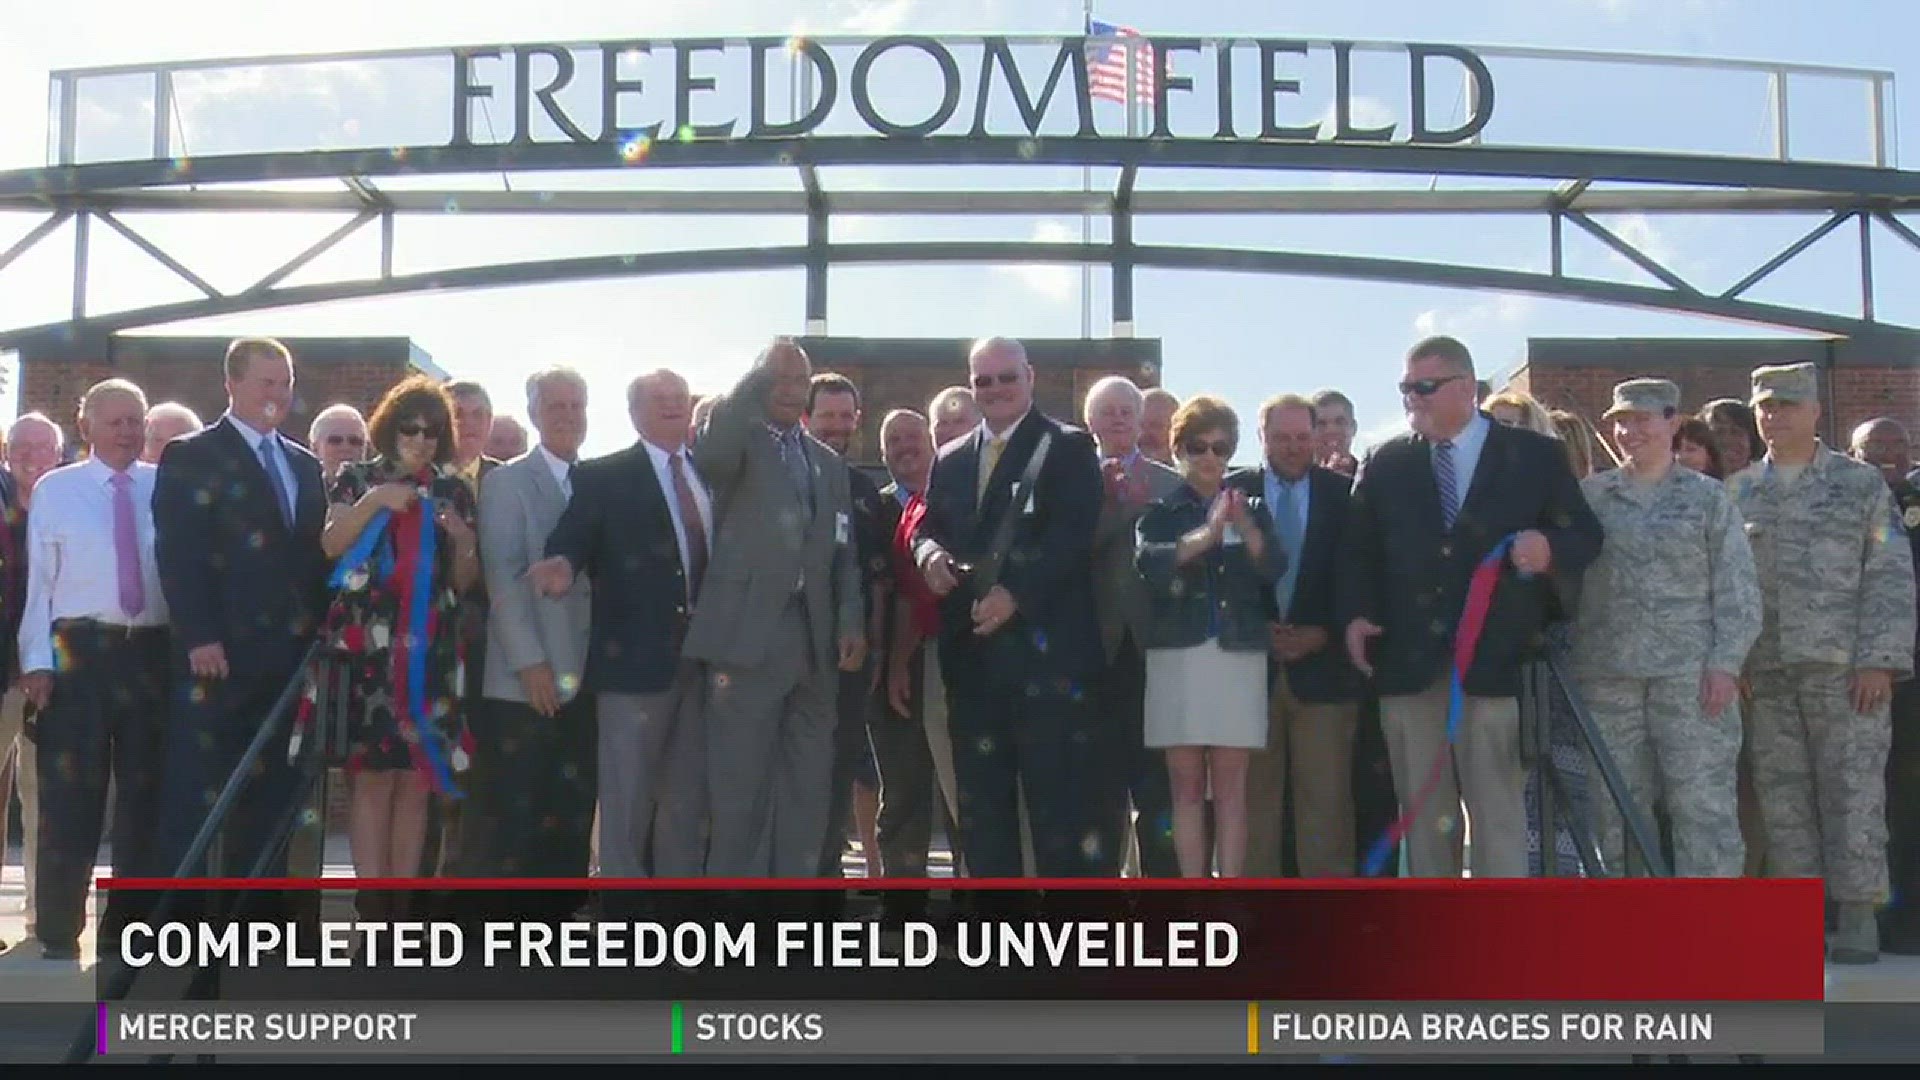 Completed Freedom Field unveiled